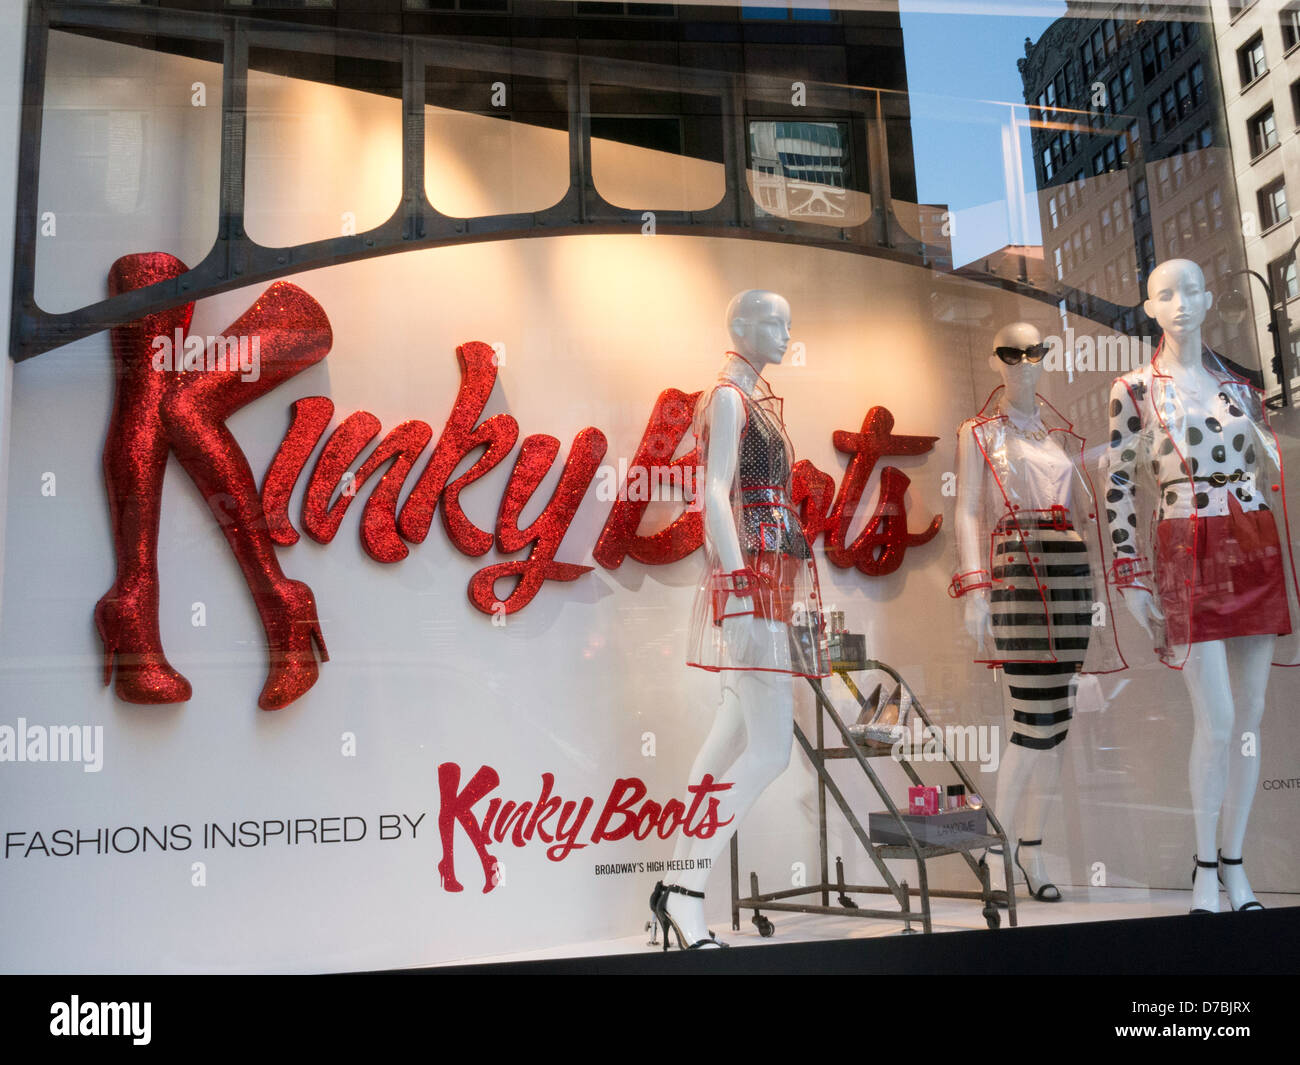 Kinky Boots de Broadway, Fenêtre d'affichage, Lord & Taylor, magasin phare, 424 Fifth Avenue, New York Banque D'Images